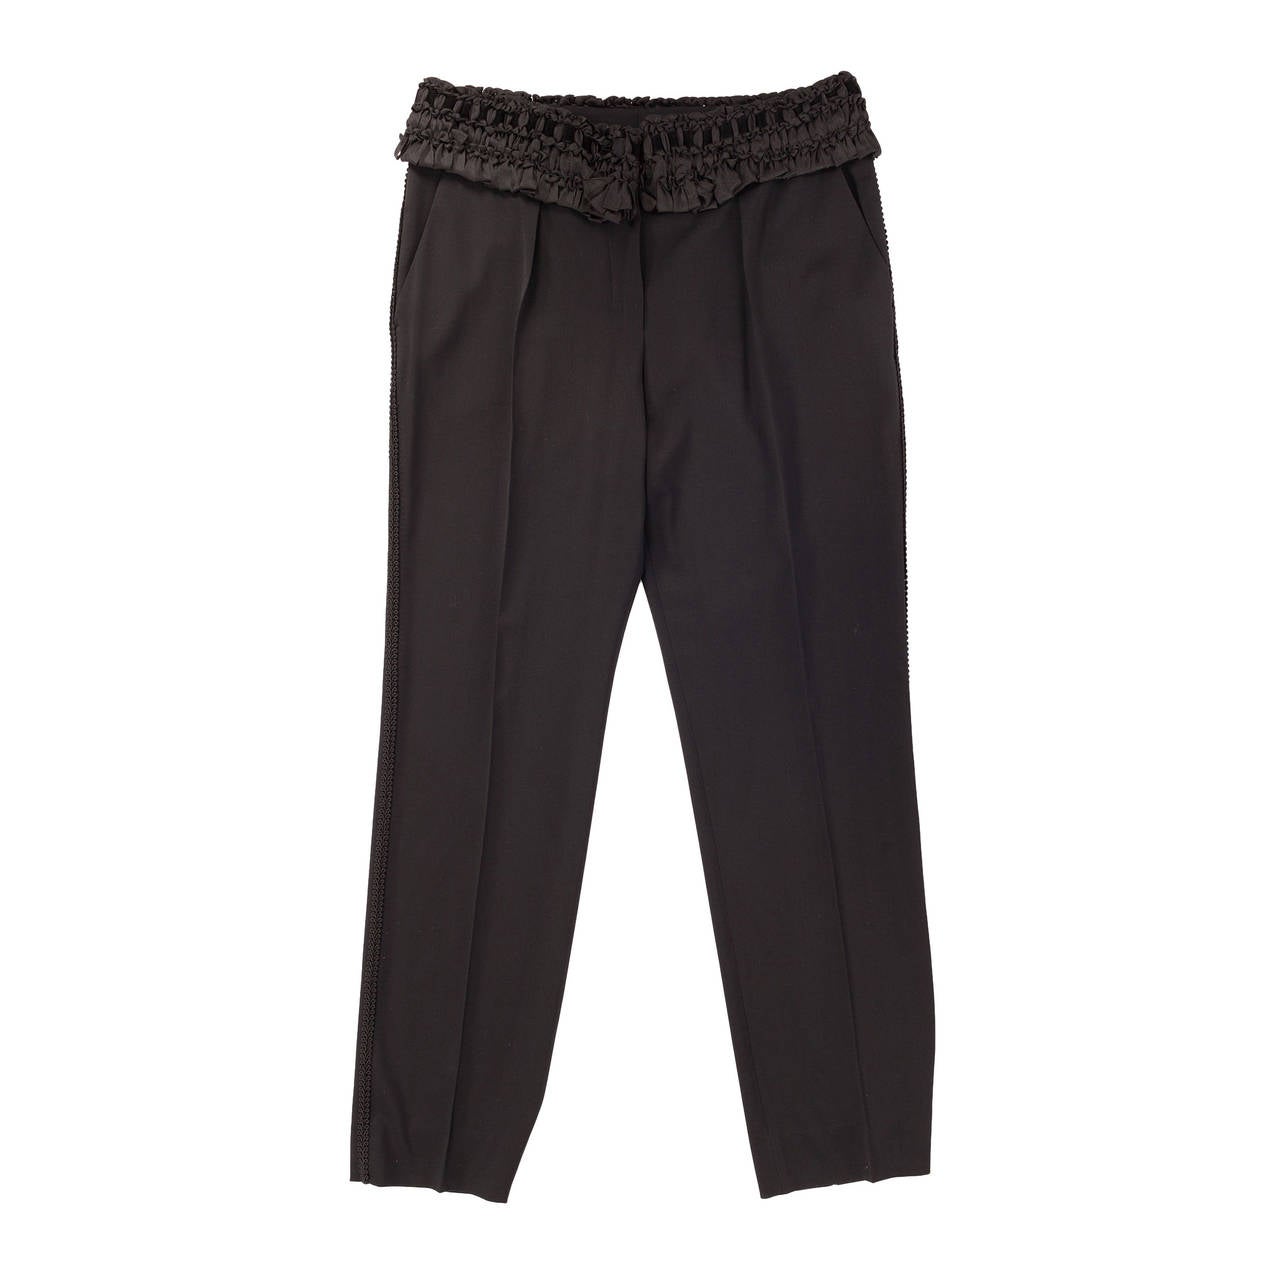 Yves Saint Laurent by Stefano Pilati wool pant with ruffle details SS06, Sz 12